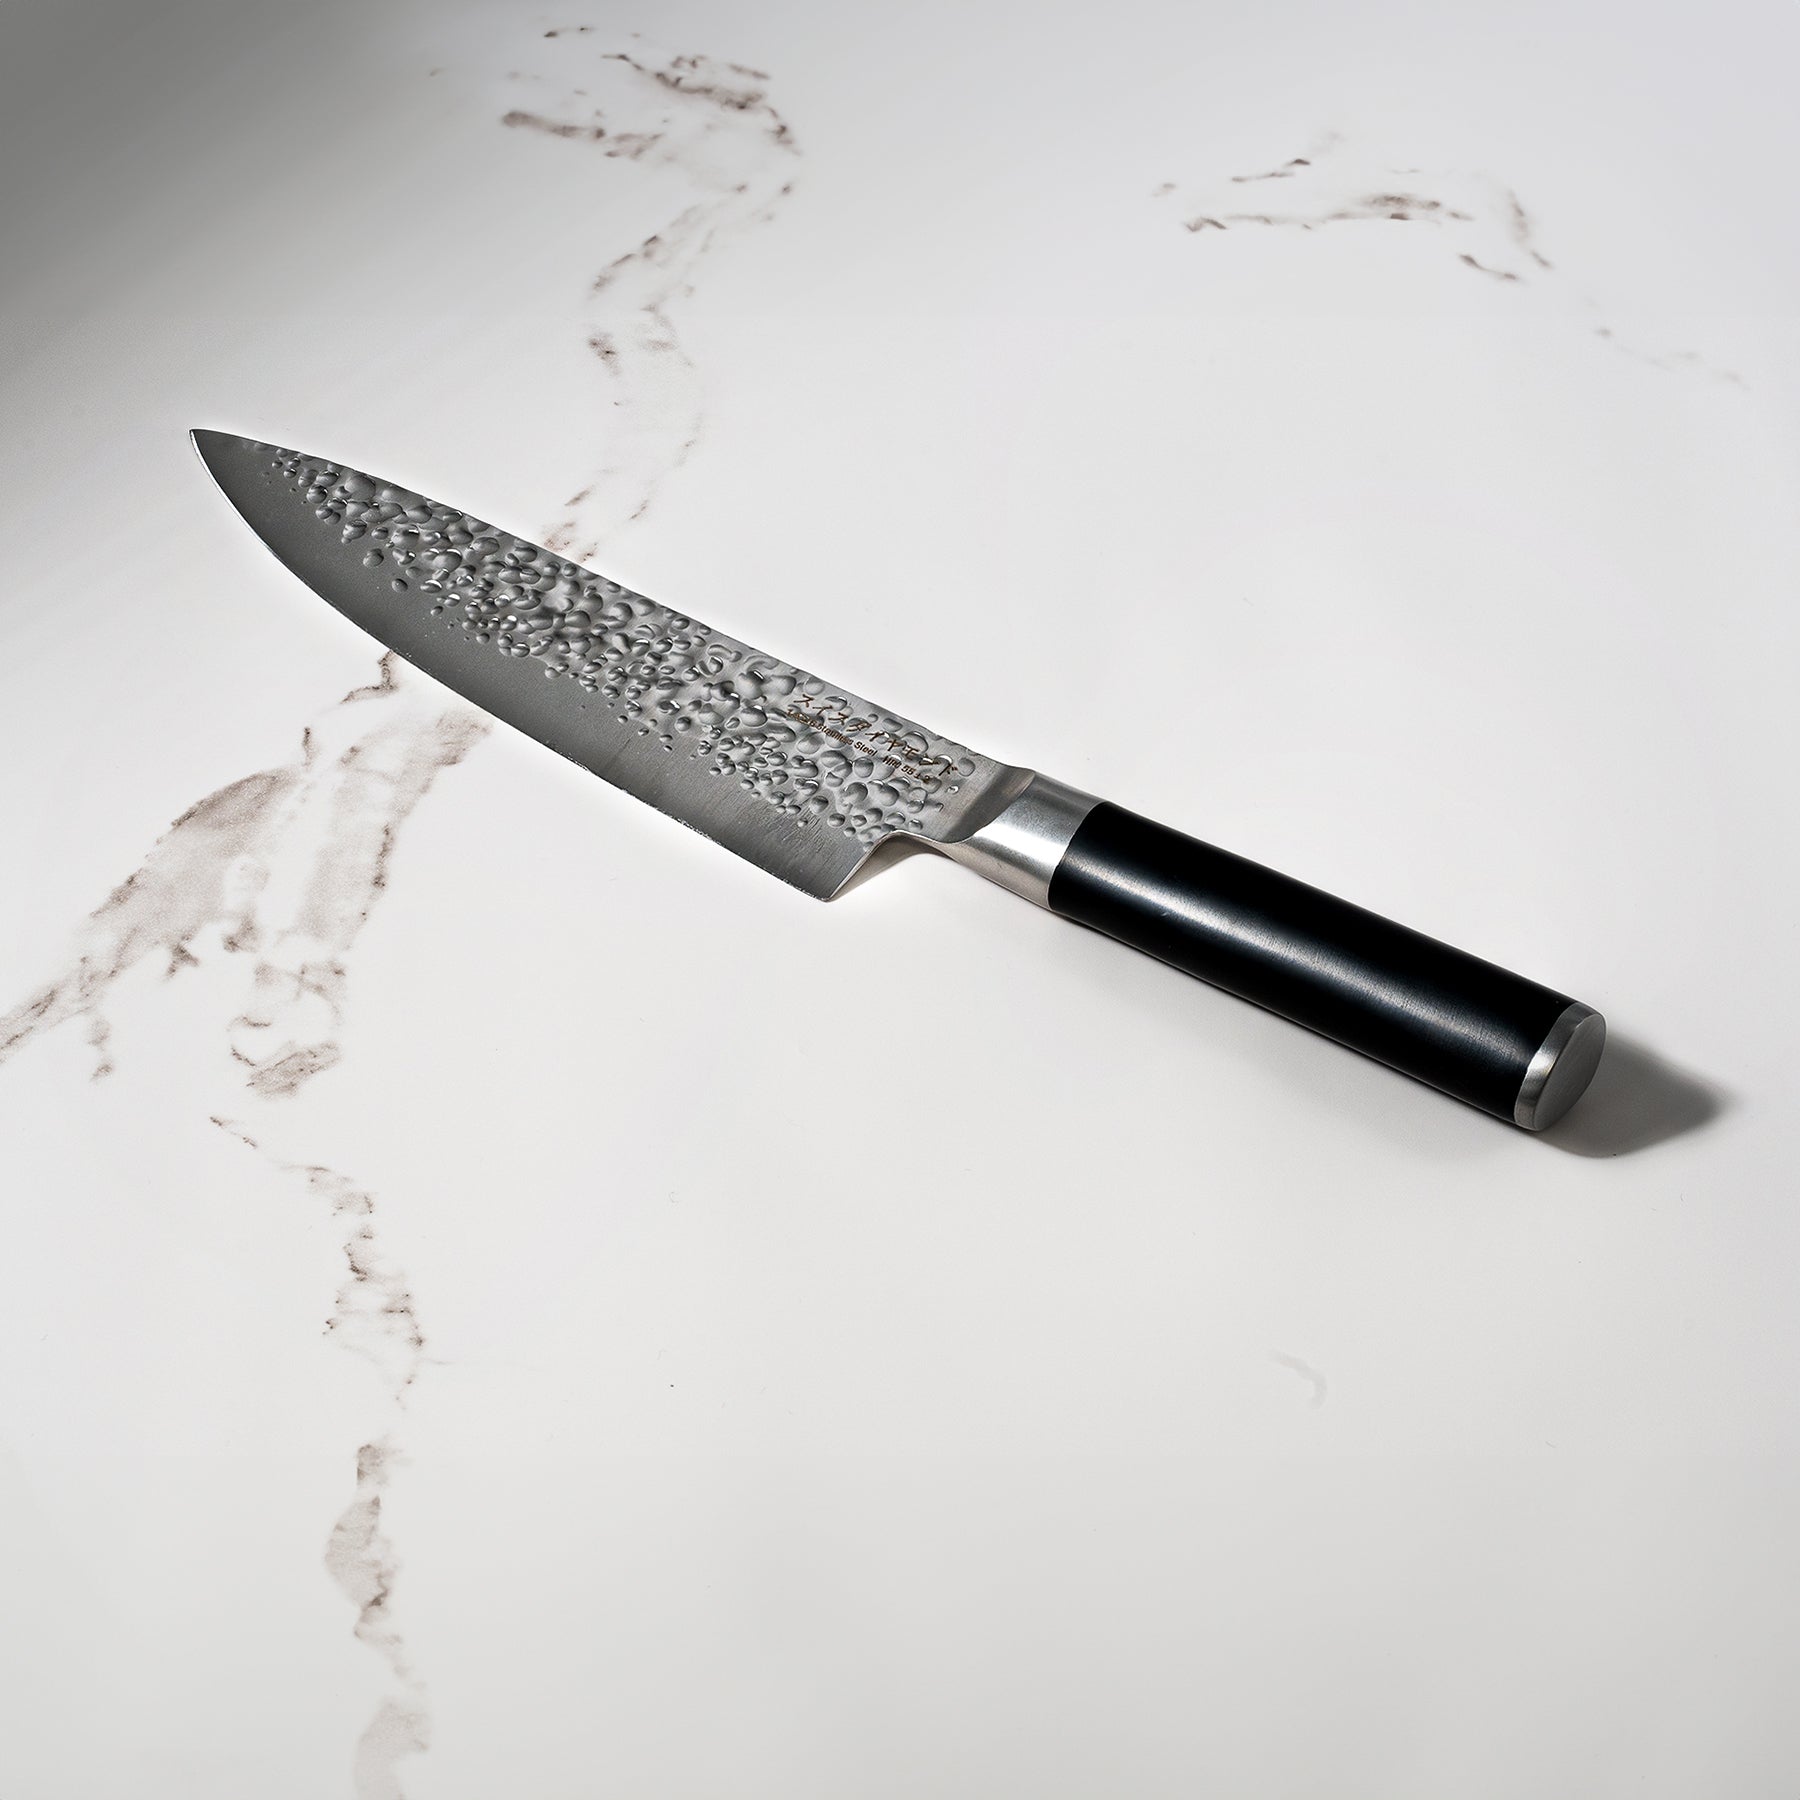 8" Hammered Chef Knife on white marble kitchen counter top